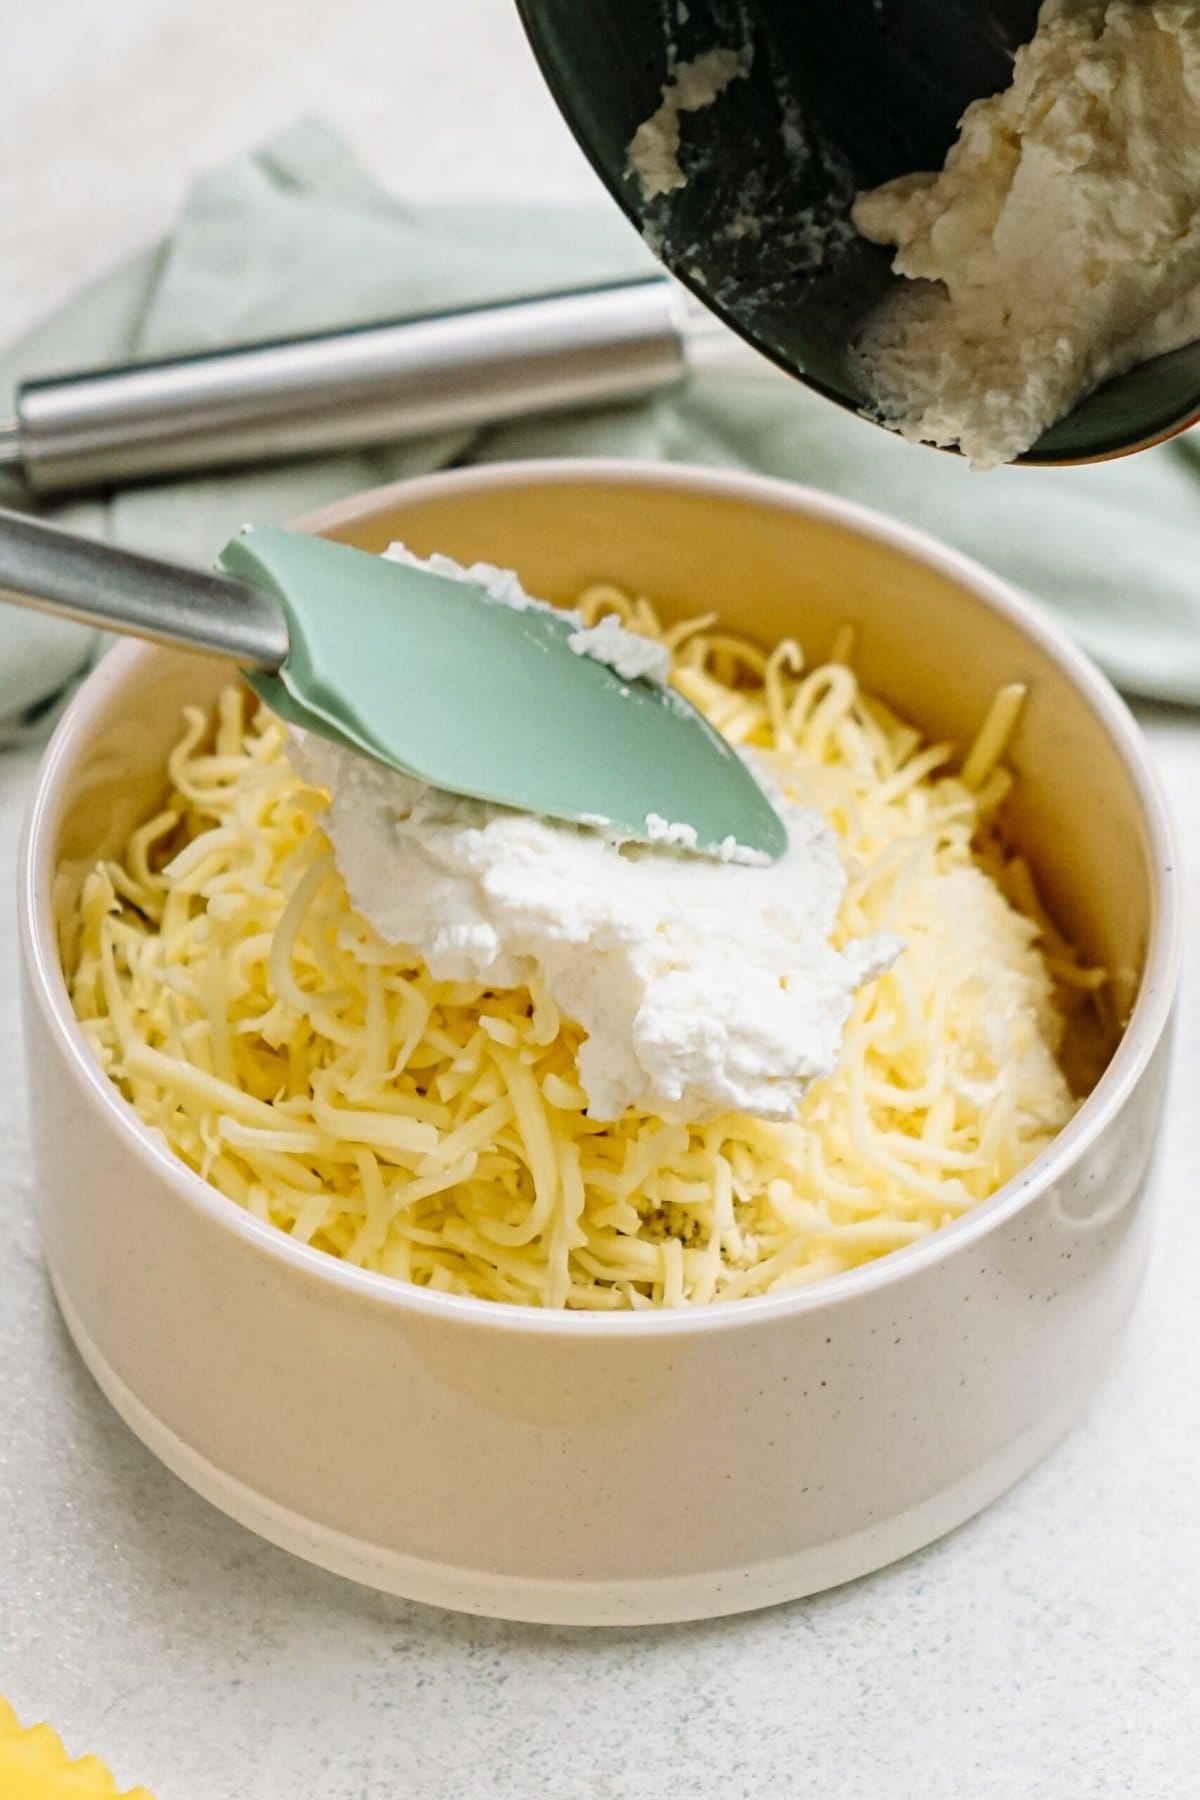 A bowl of shredded cheese is being topped with a dollop of ricotta cheese using a green spatula.